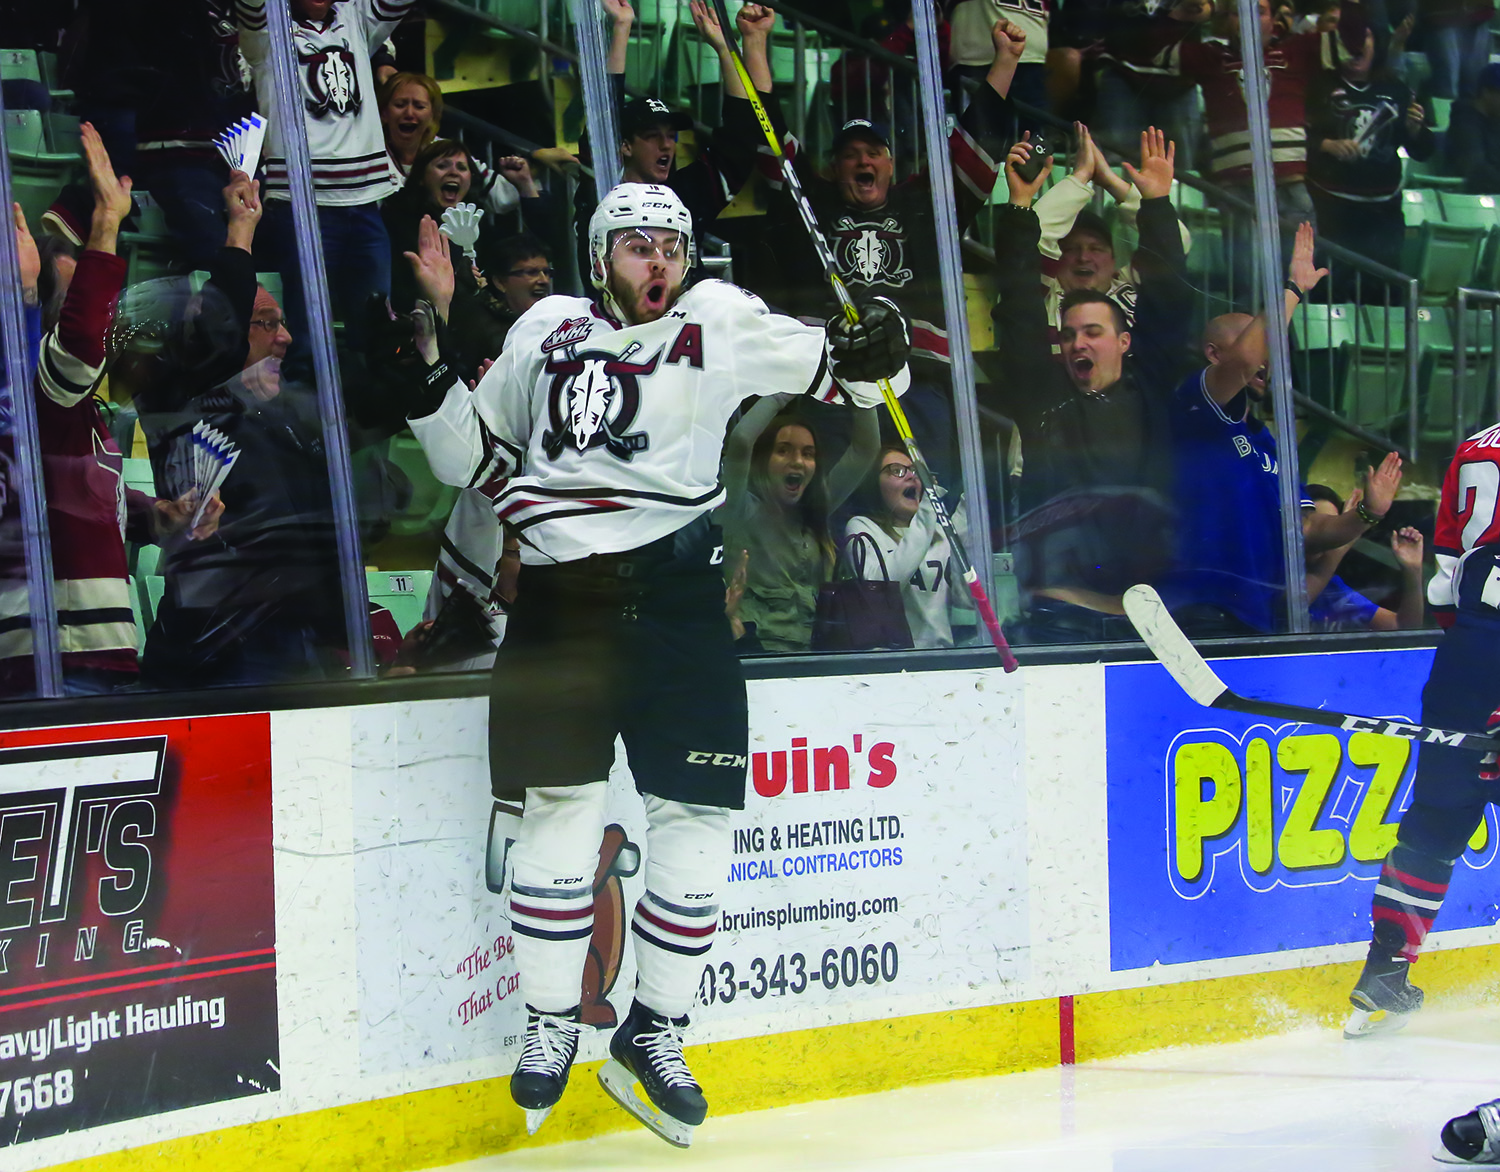 GOAL! - Evan Polei of the Red Deer Rebels celebrated his game winning goal in the second overtime period of Game 3 of the WHL Eastern Conference Quarterfinal against the Lethbridge Hurricanes at the ENMAX Centrium on Wednesday. The Rebels won the game by a score of 4-3.